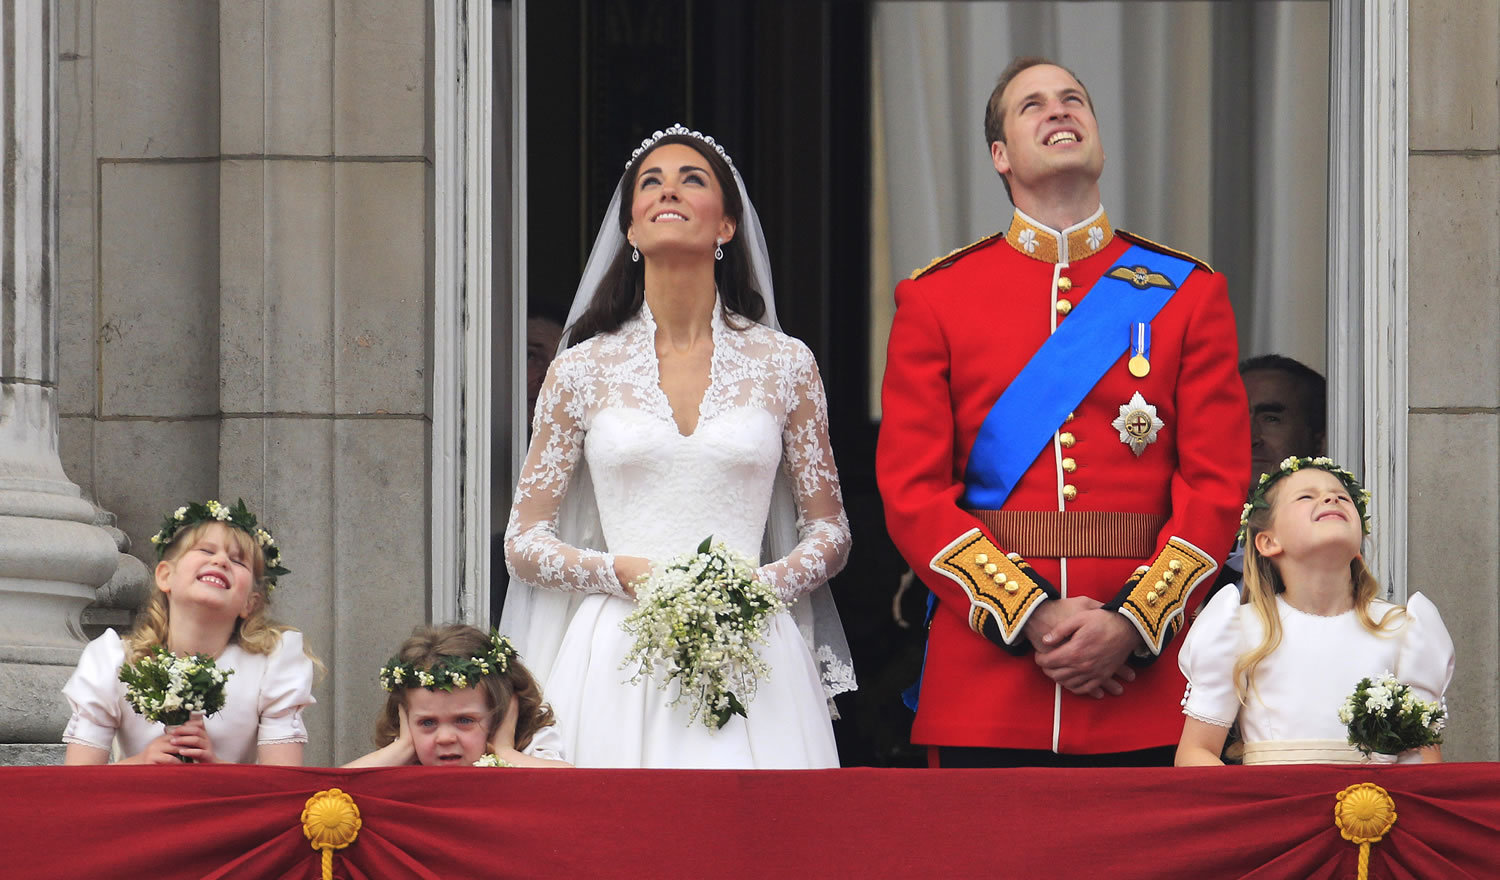 Britain's Prince William and his wife Kate, Duchess of Cambridge watch a fly past of military planes from the balcony of Buckingham Palace after the Royal Wedding in London Friday, April, 29, 2011.